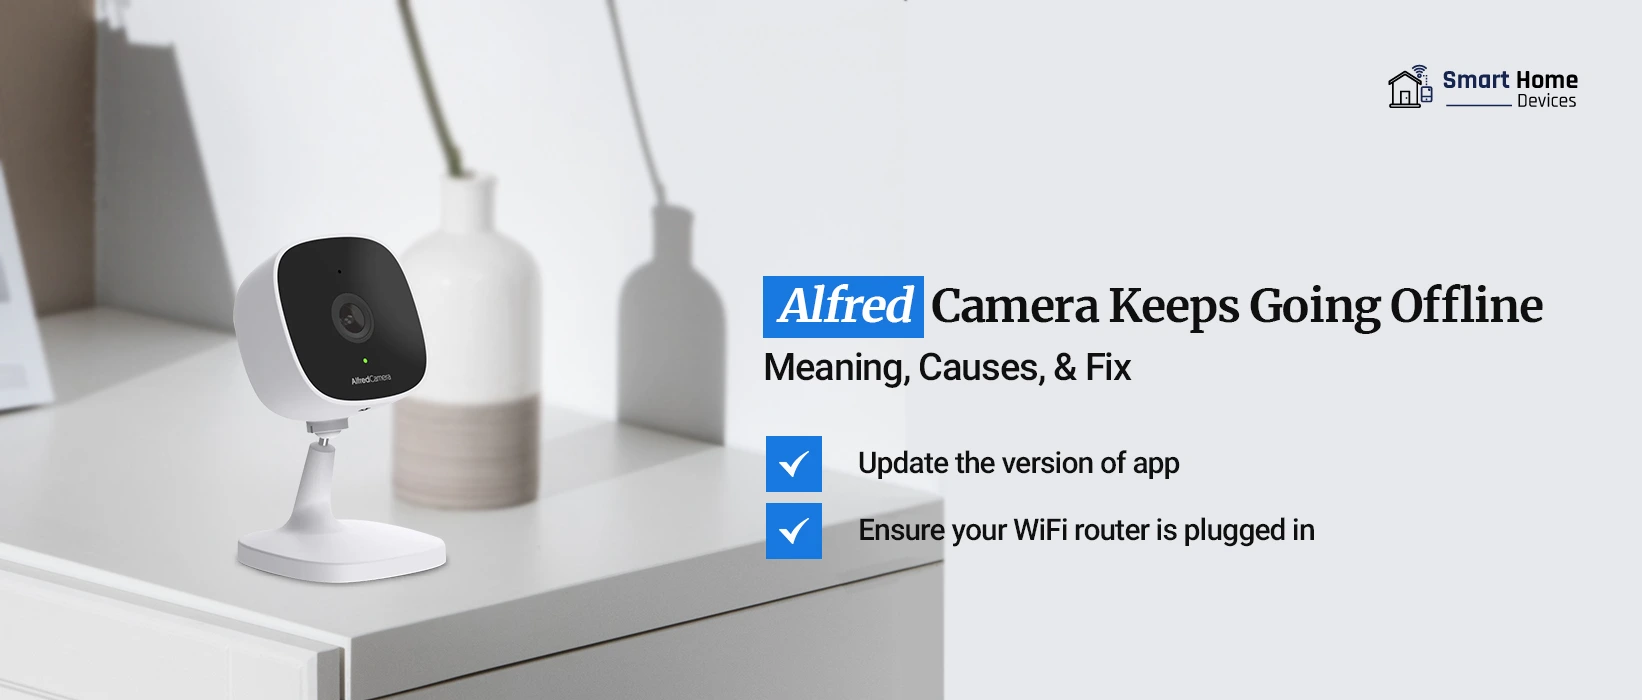 Alfred Camera Keeps Going Offline Meaning, Causes, & Fix